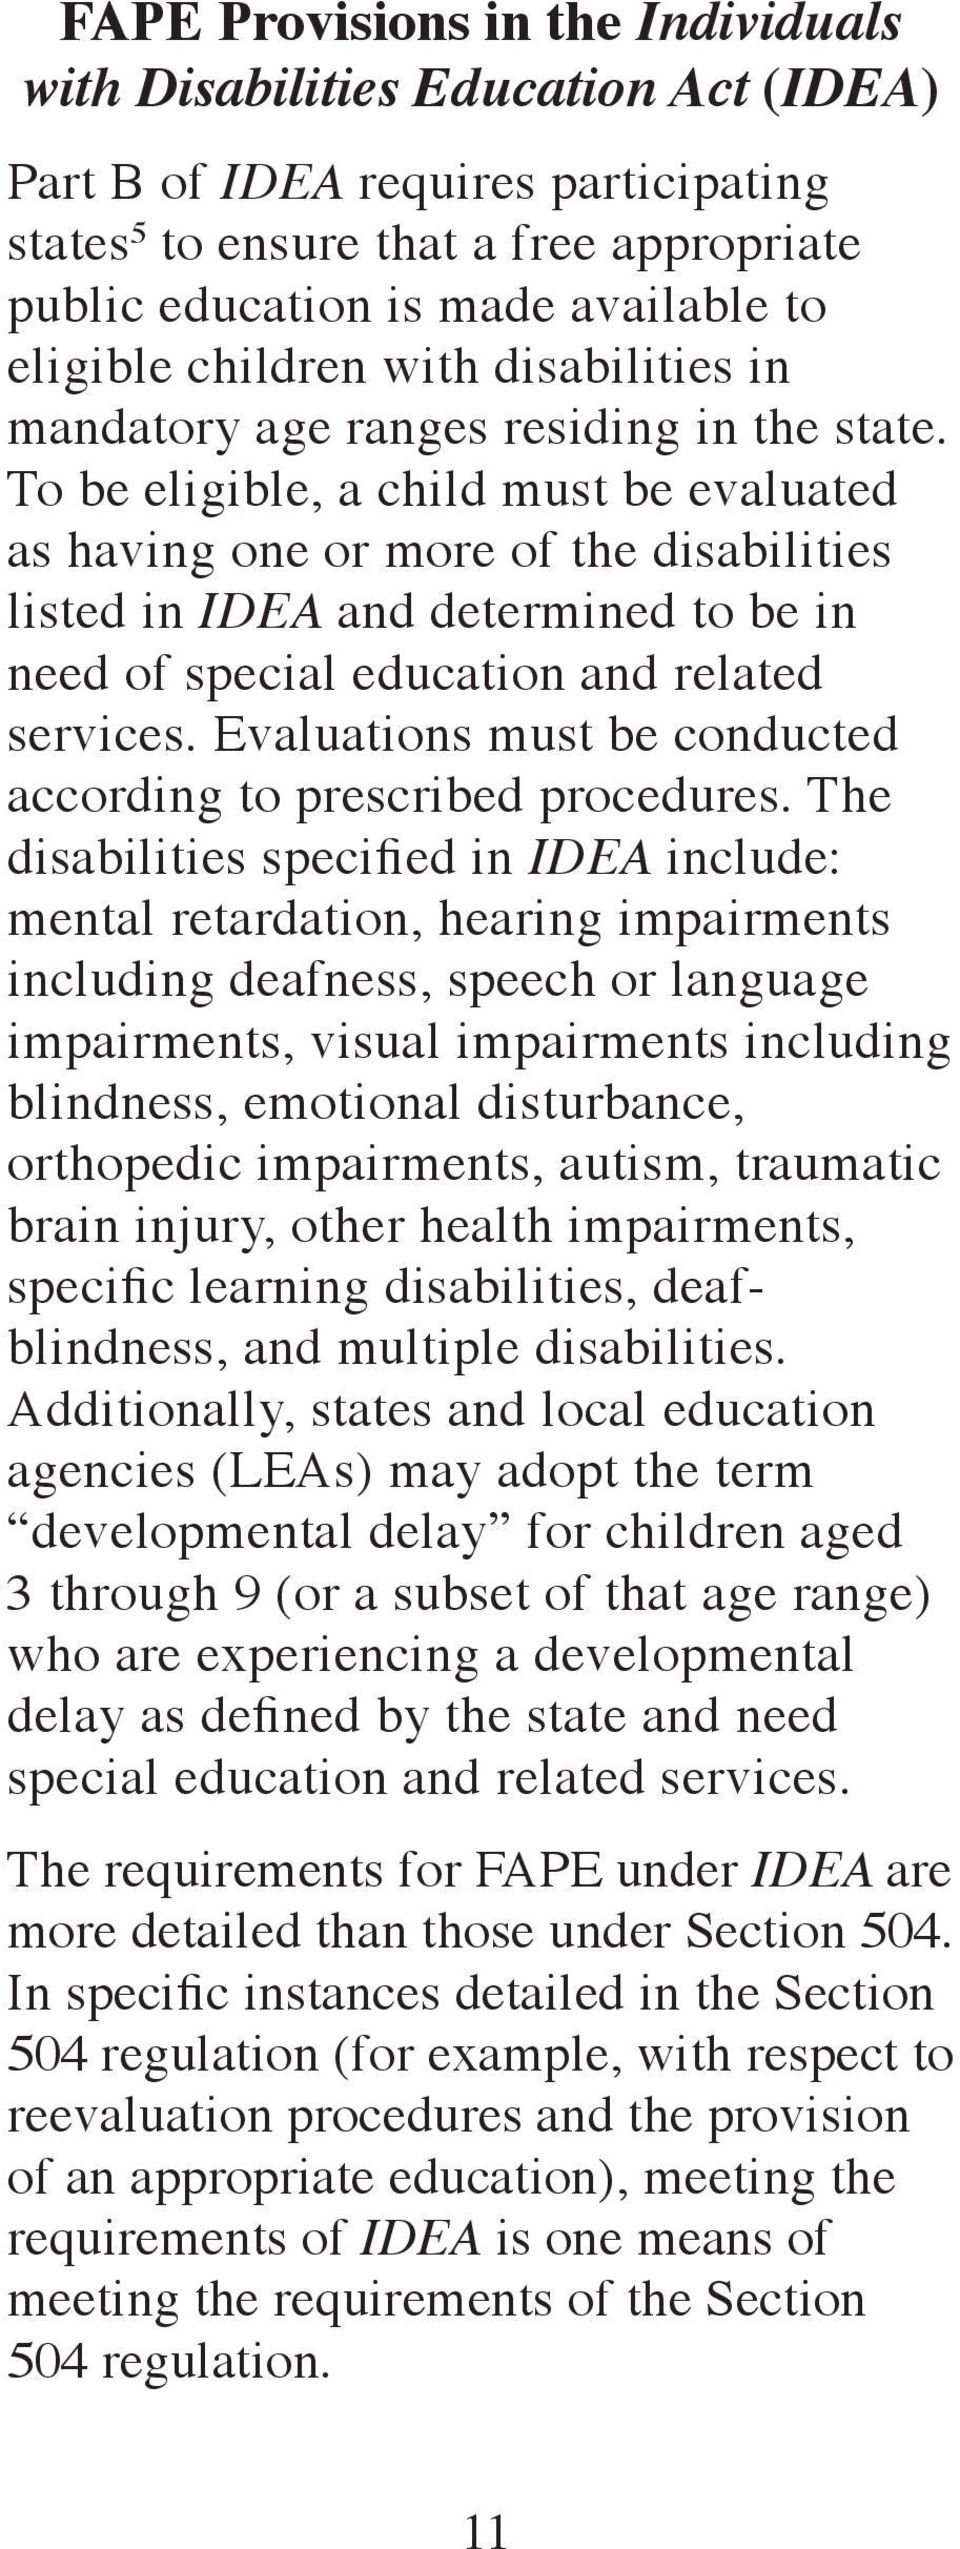 To be eligible, a child must be evaluated as having one or more of the disabilities listed in IDEA and determined to be in need of special education and related services.